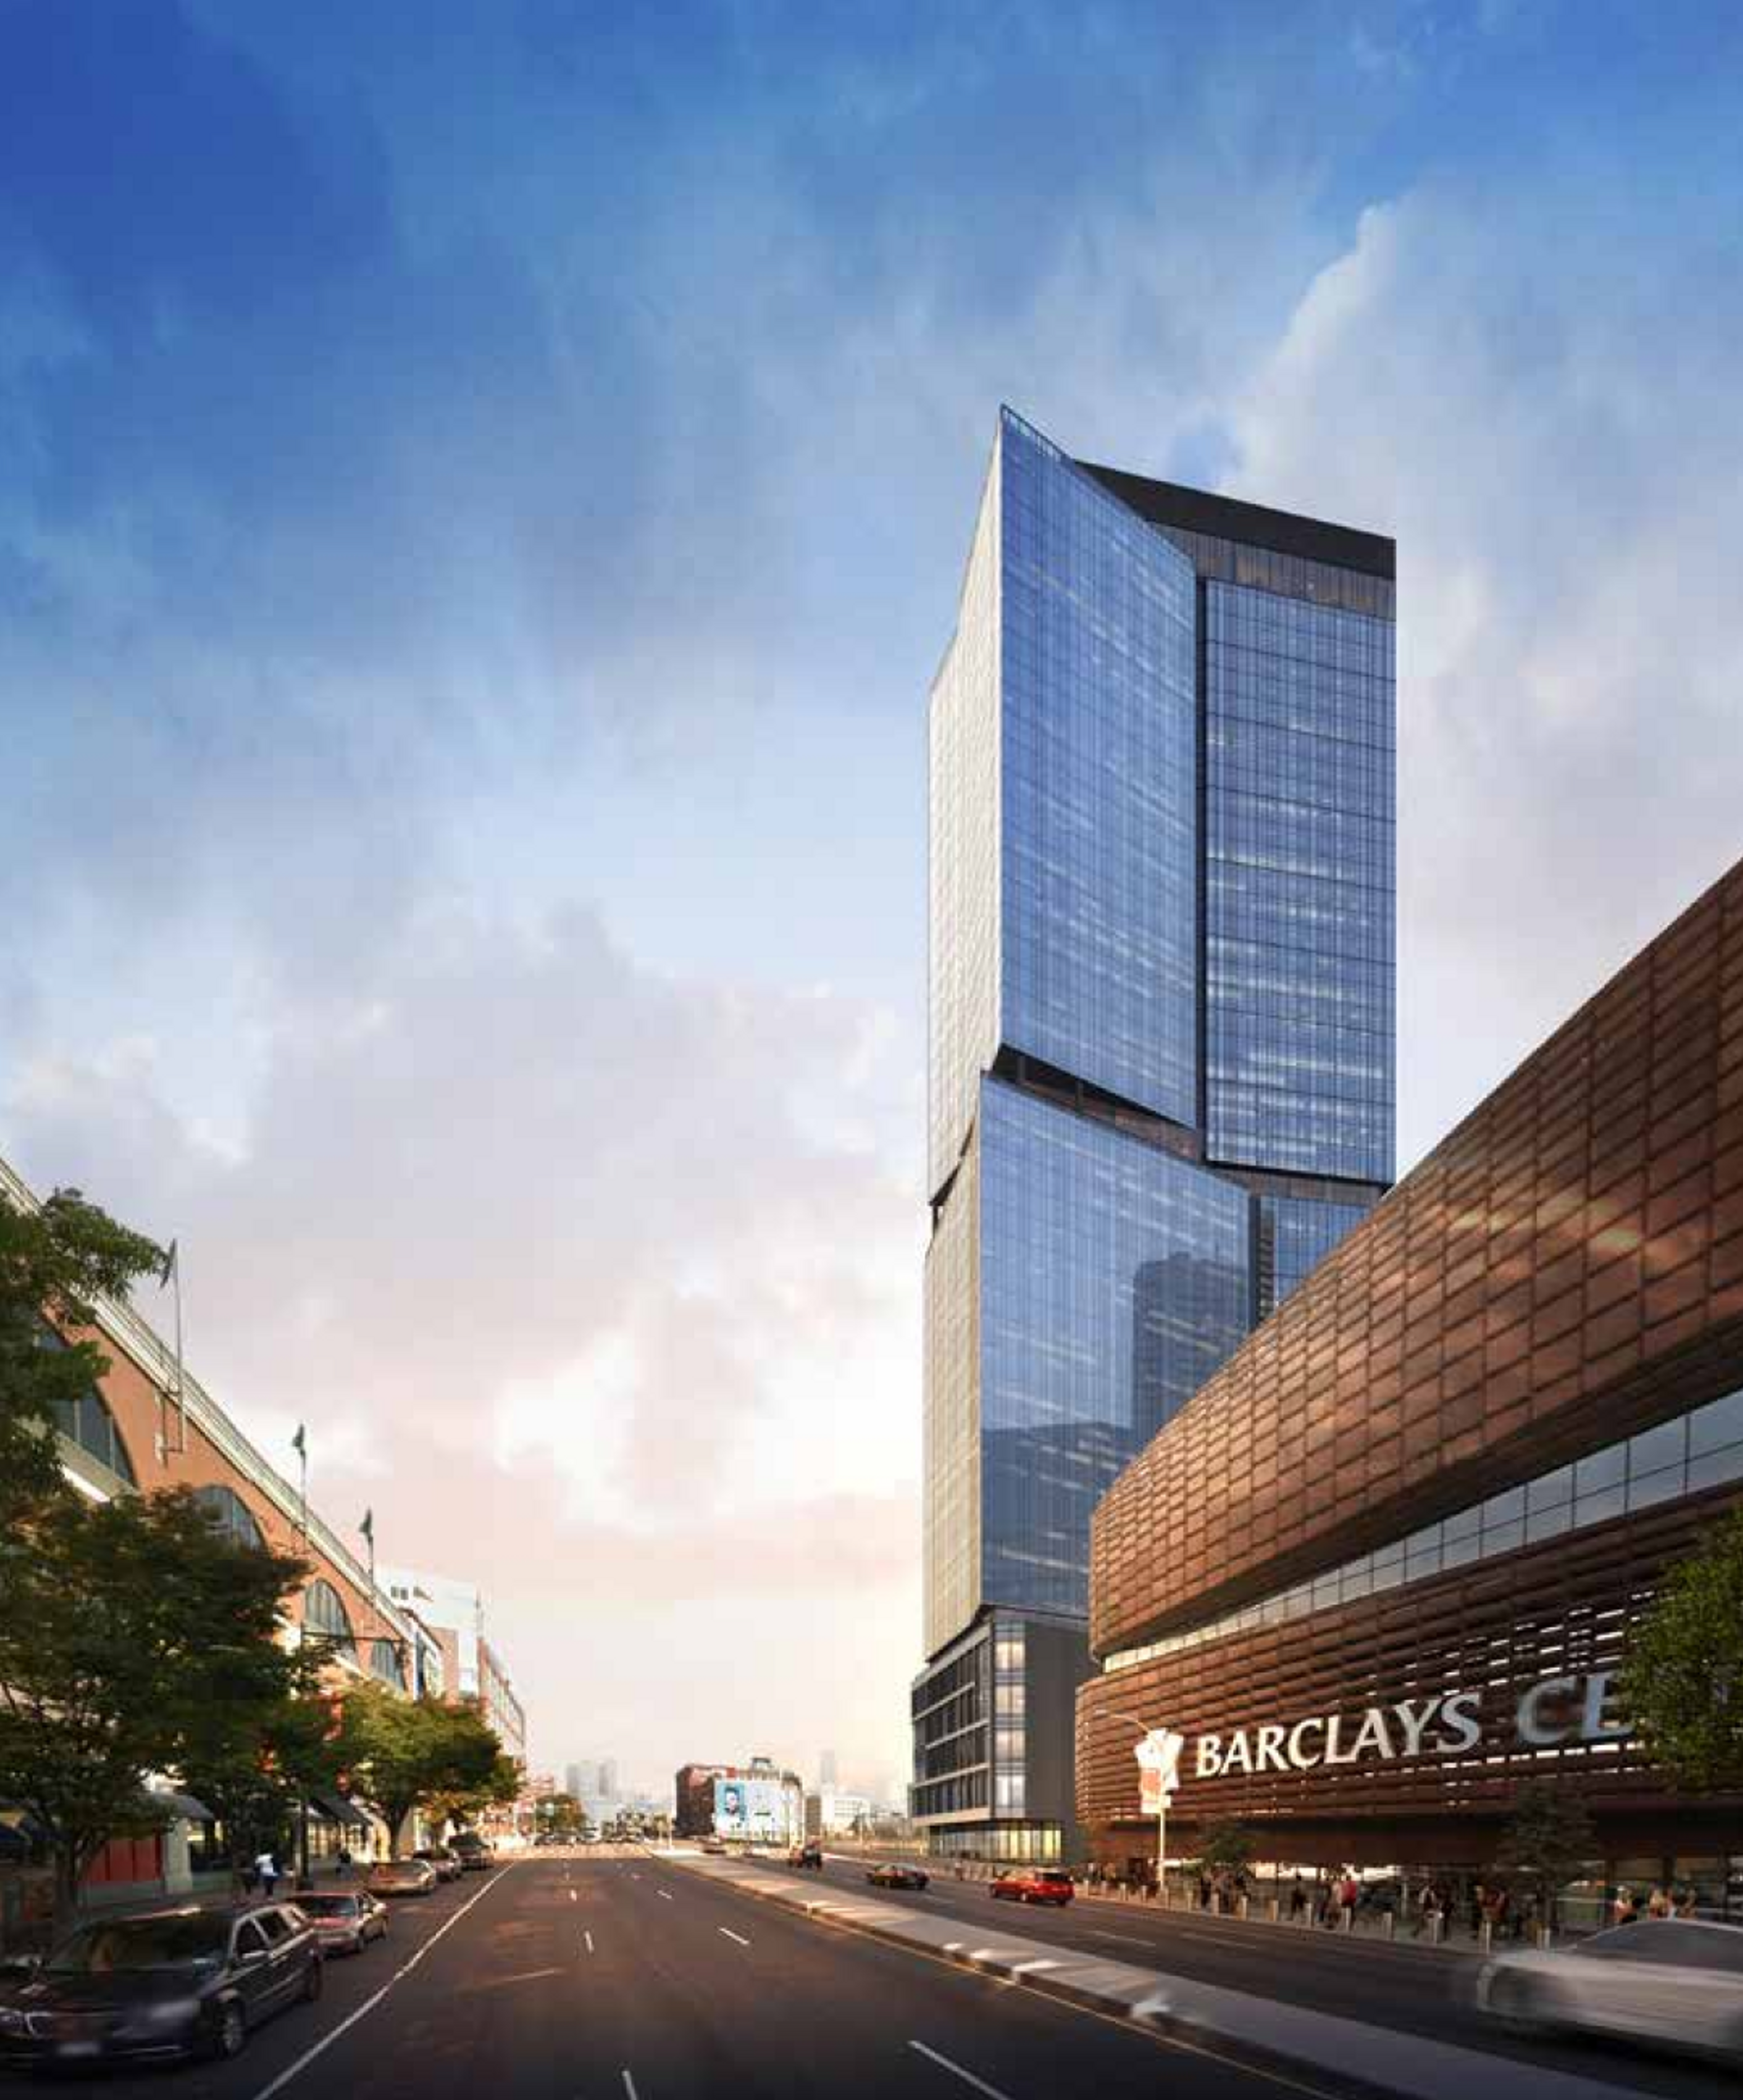 Barclays Center was a key component in the transformative Atlantic Yards megaproject